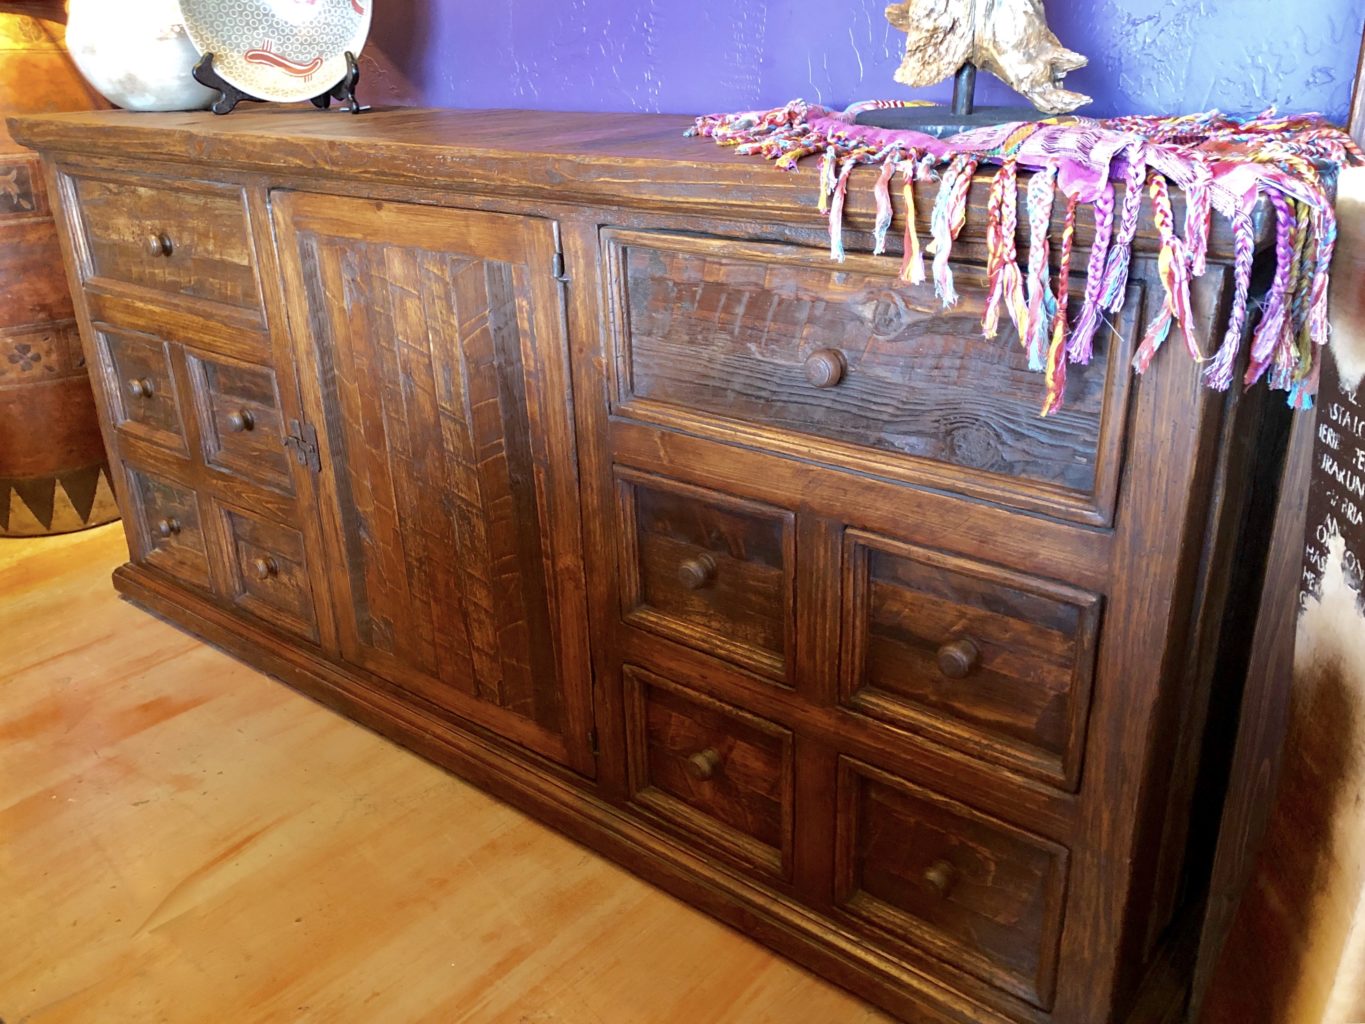 Elite Lge Cascara Buffet with Wood Pulls